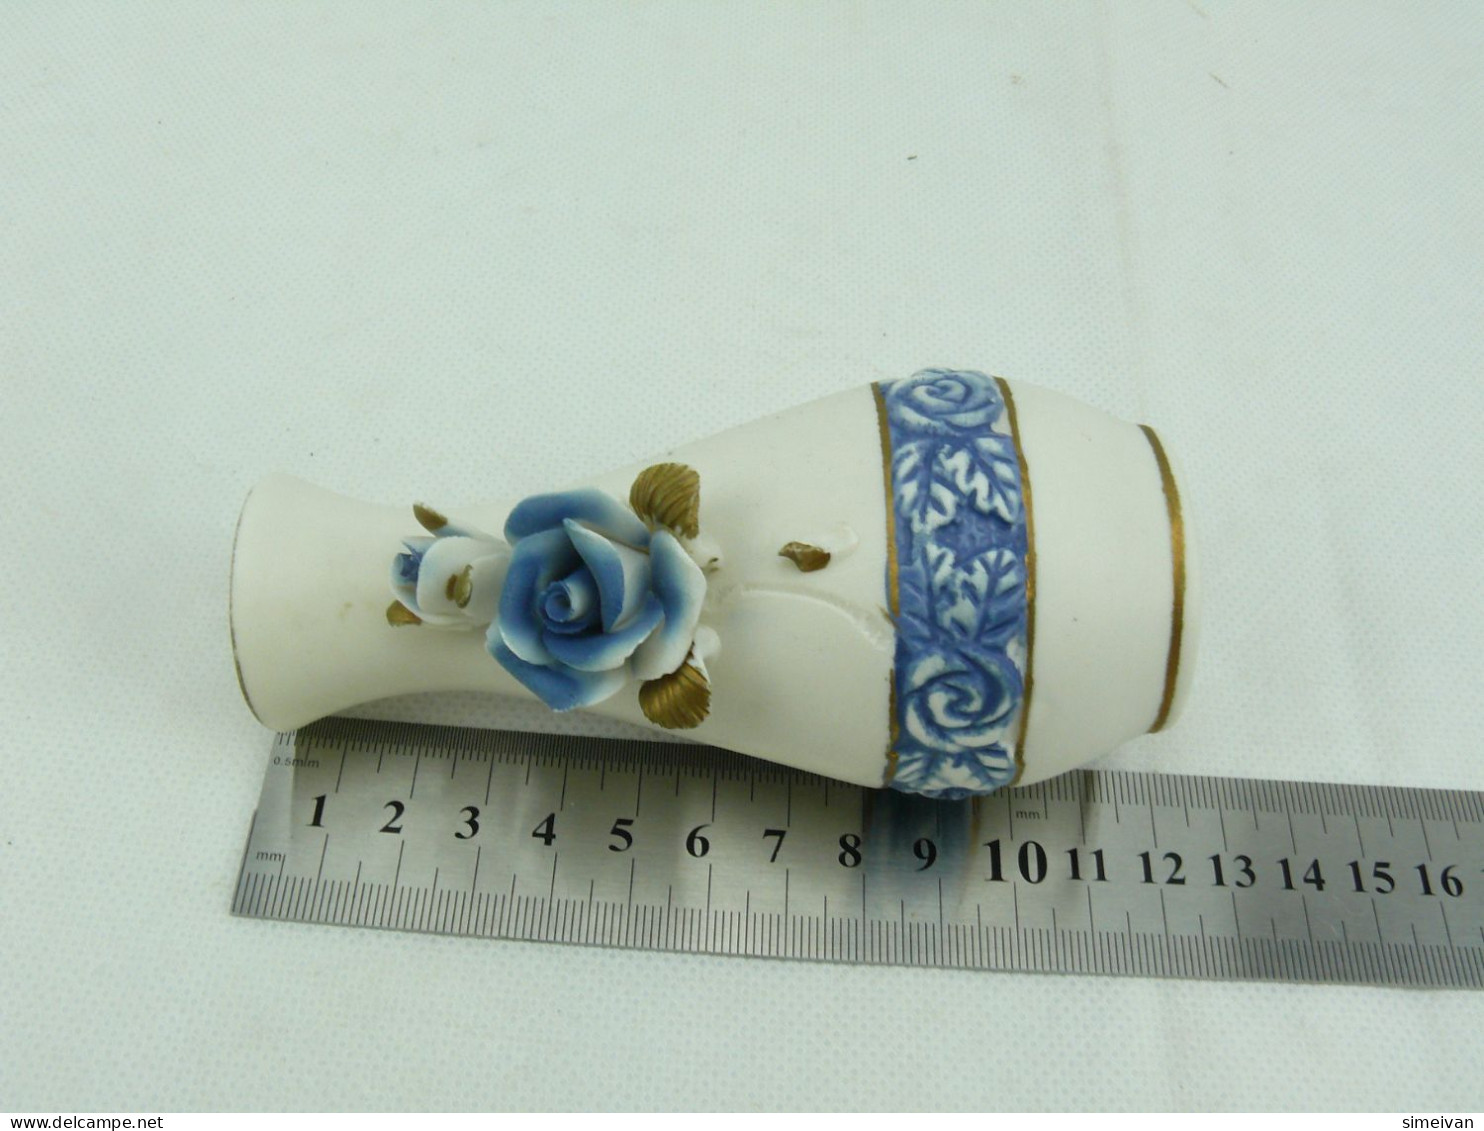 Beautiful Small Porcelain Vase with Blue Roses 12cm #2339